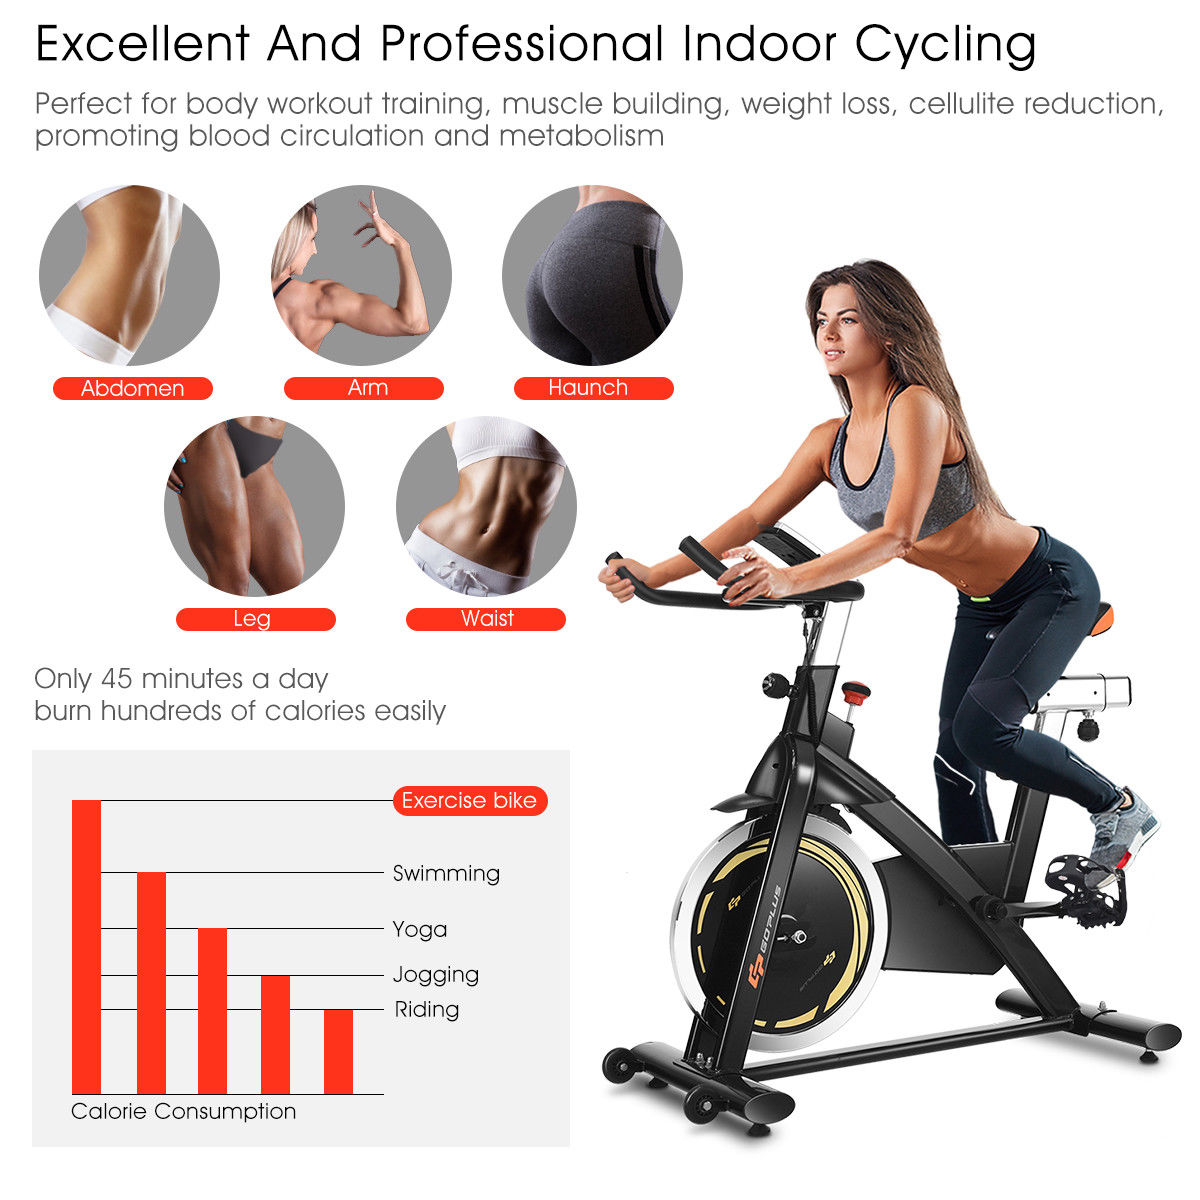 Goplus Exercise Bike Cycle Trainer Indoor Workout Cardio Fitness Bicycle Stationary - image 2 of 10